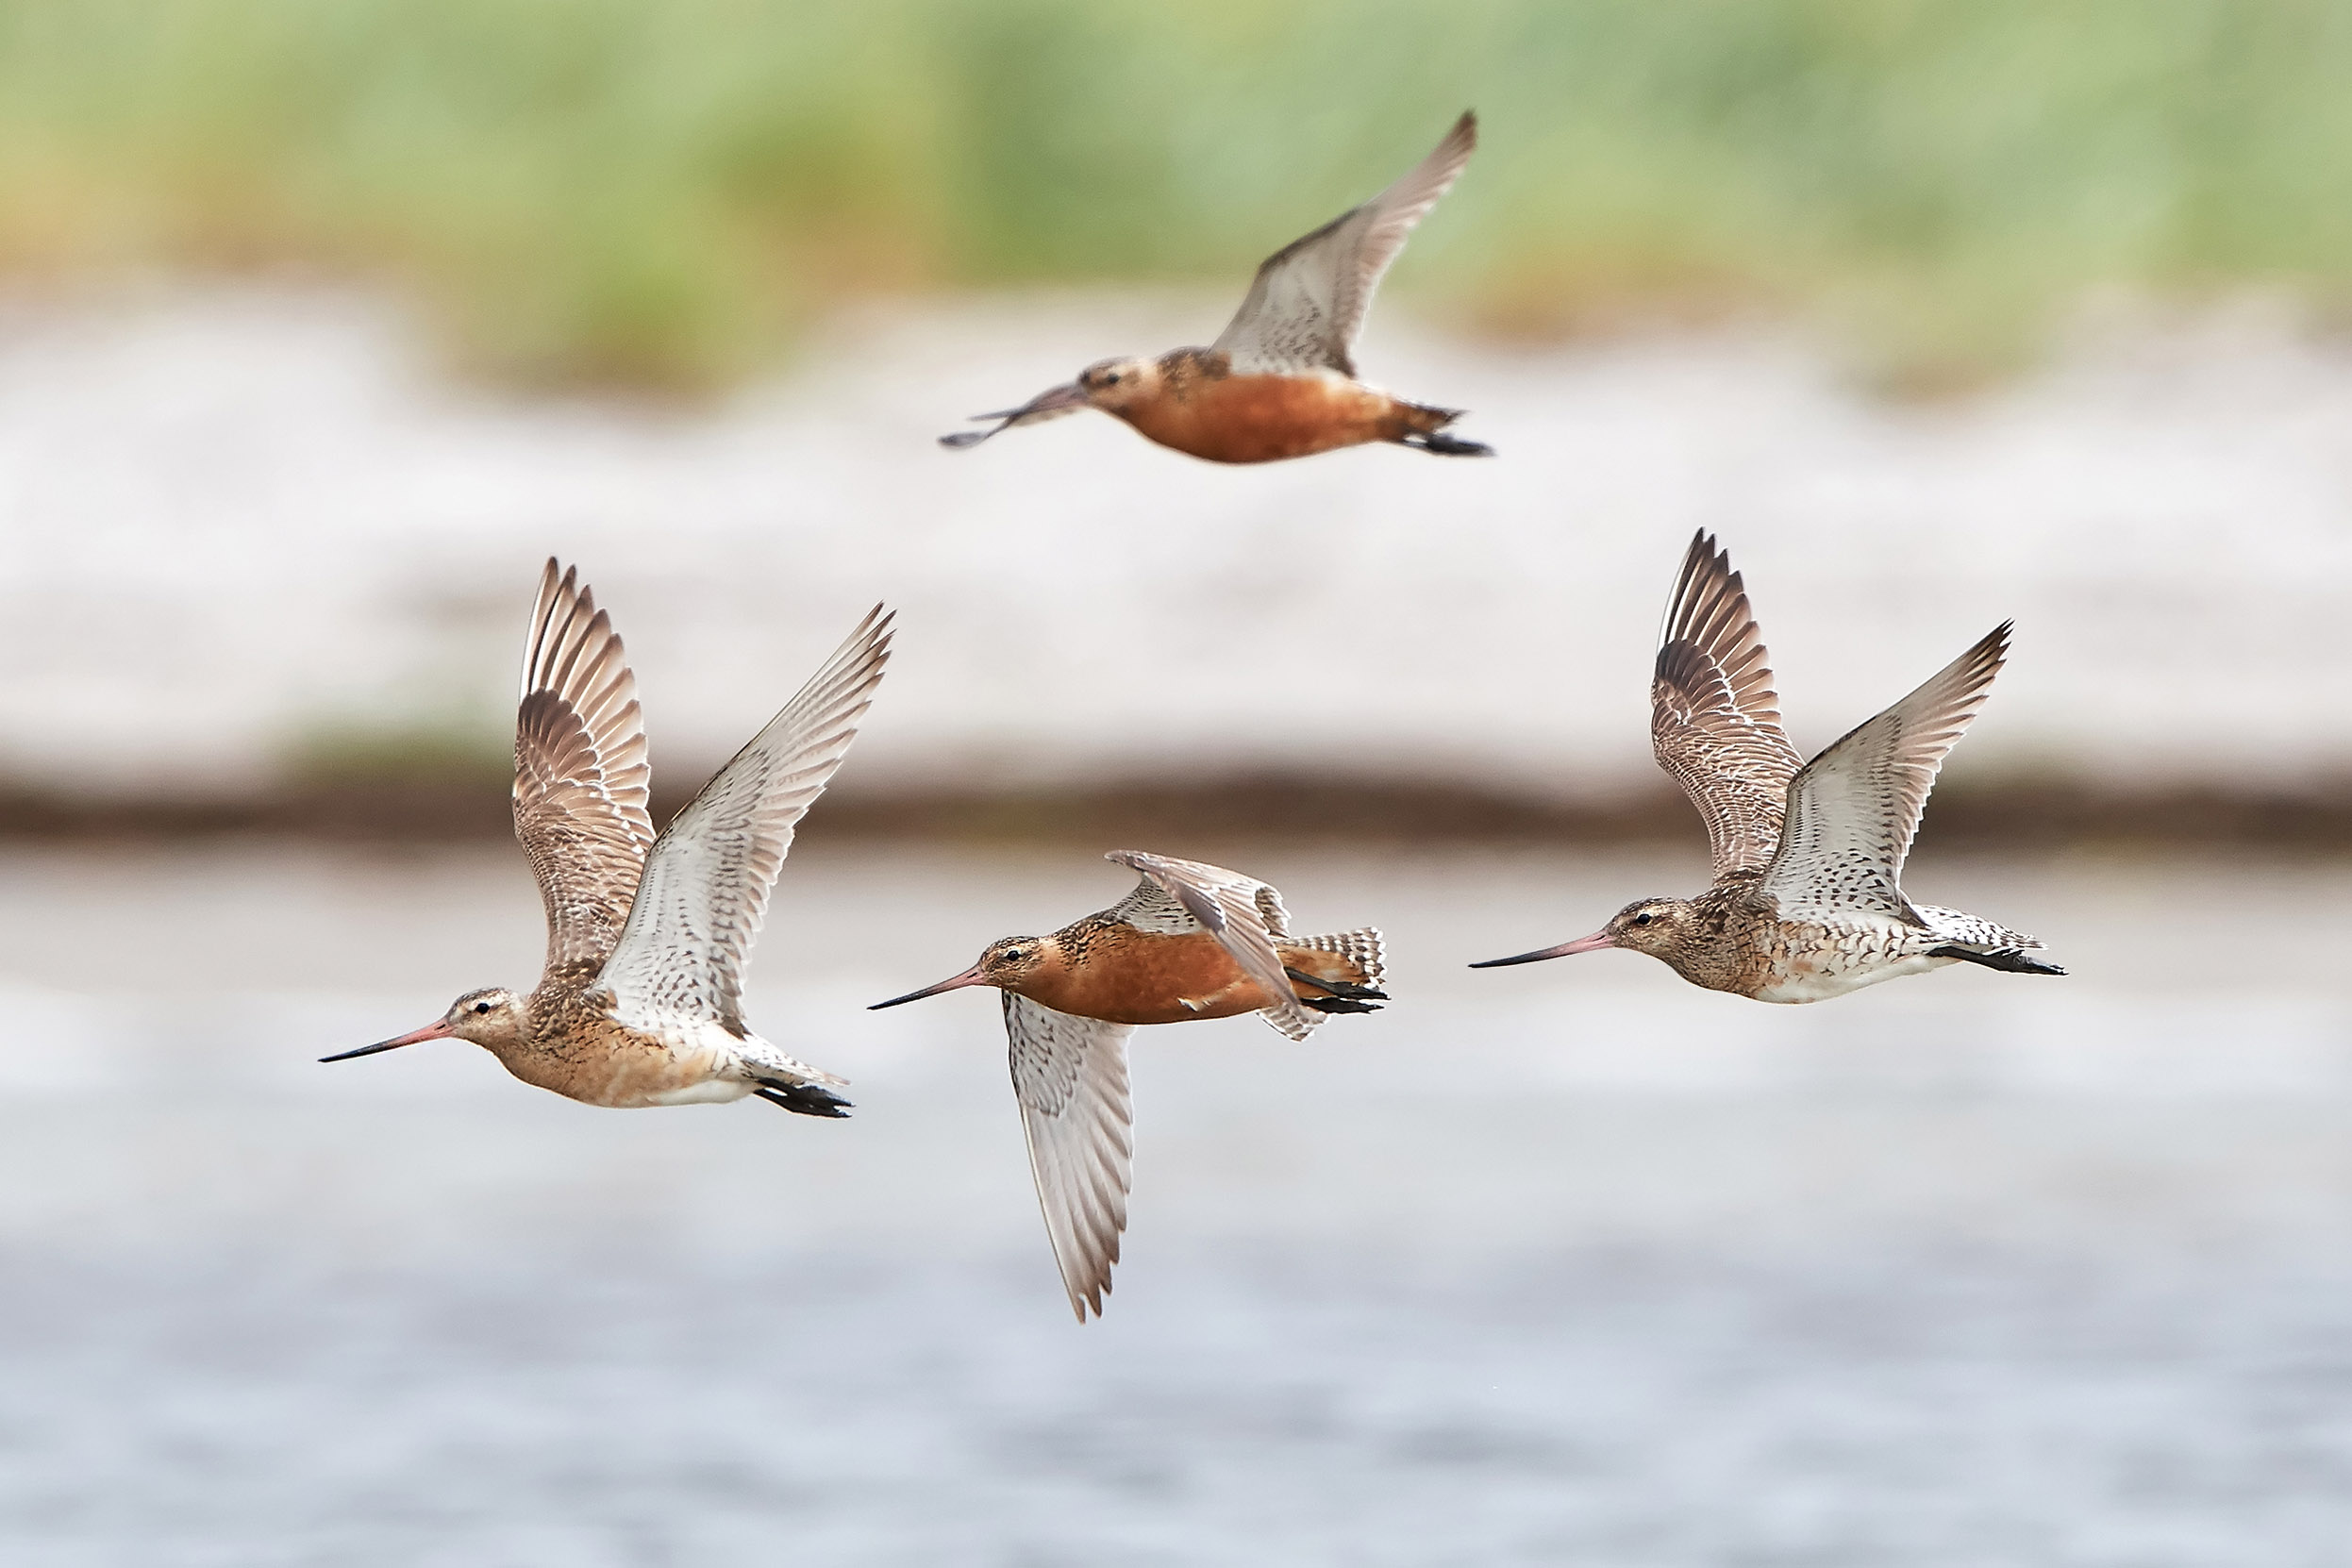 Four Bar-tailed Godwits flying in diamond formation over water.